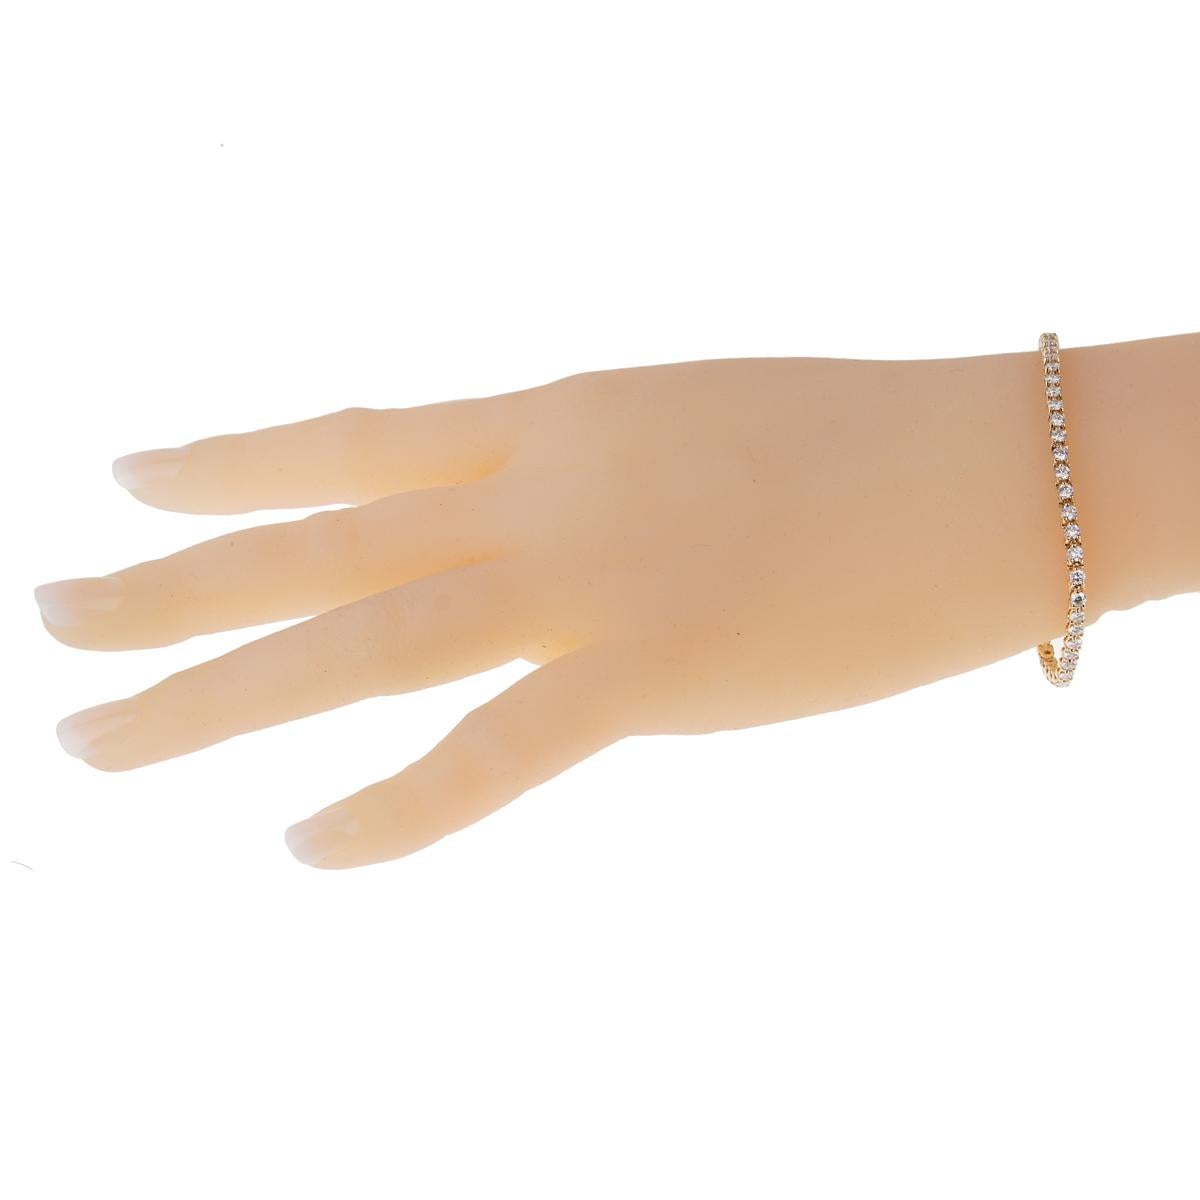 The Cartier diamond gold tennis bracelet is without a doubt a modern classic for any woman's wardrobe! Set in 18k yellow gold with the finest of Cartier round brilliant cut diamonds and weighing a total of approximately 3 carats, this Cartier